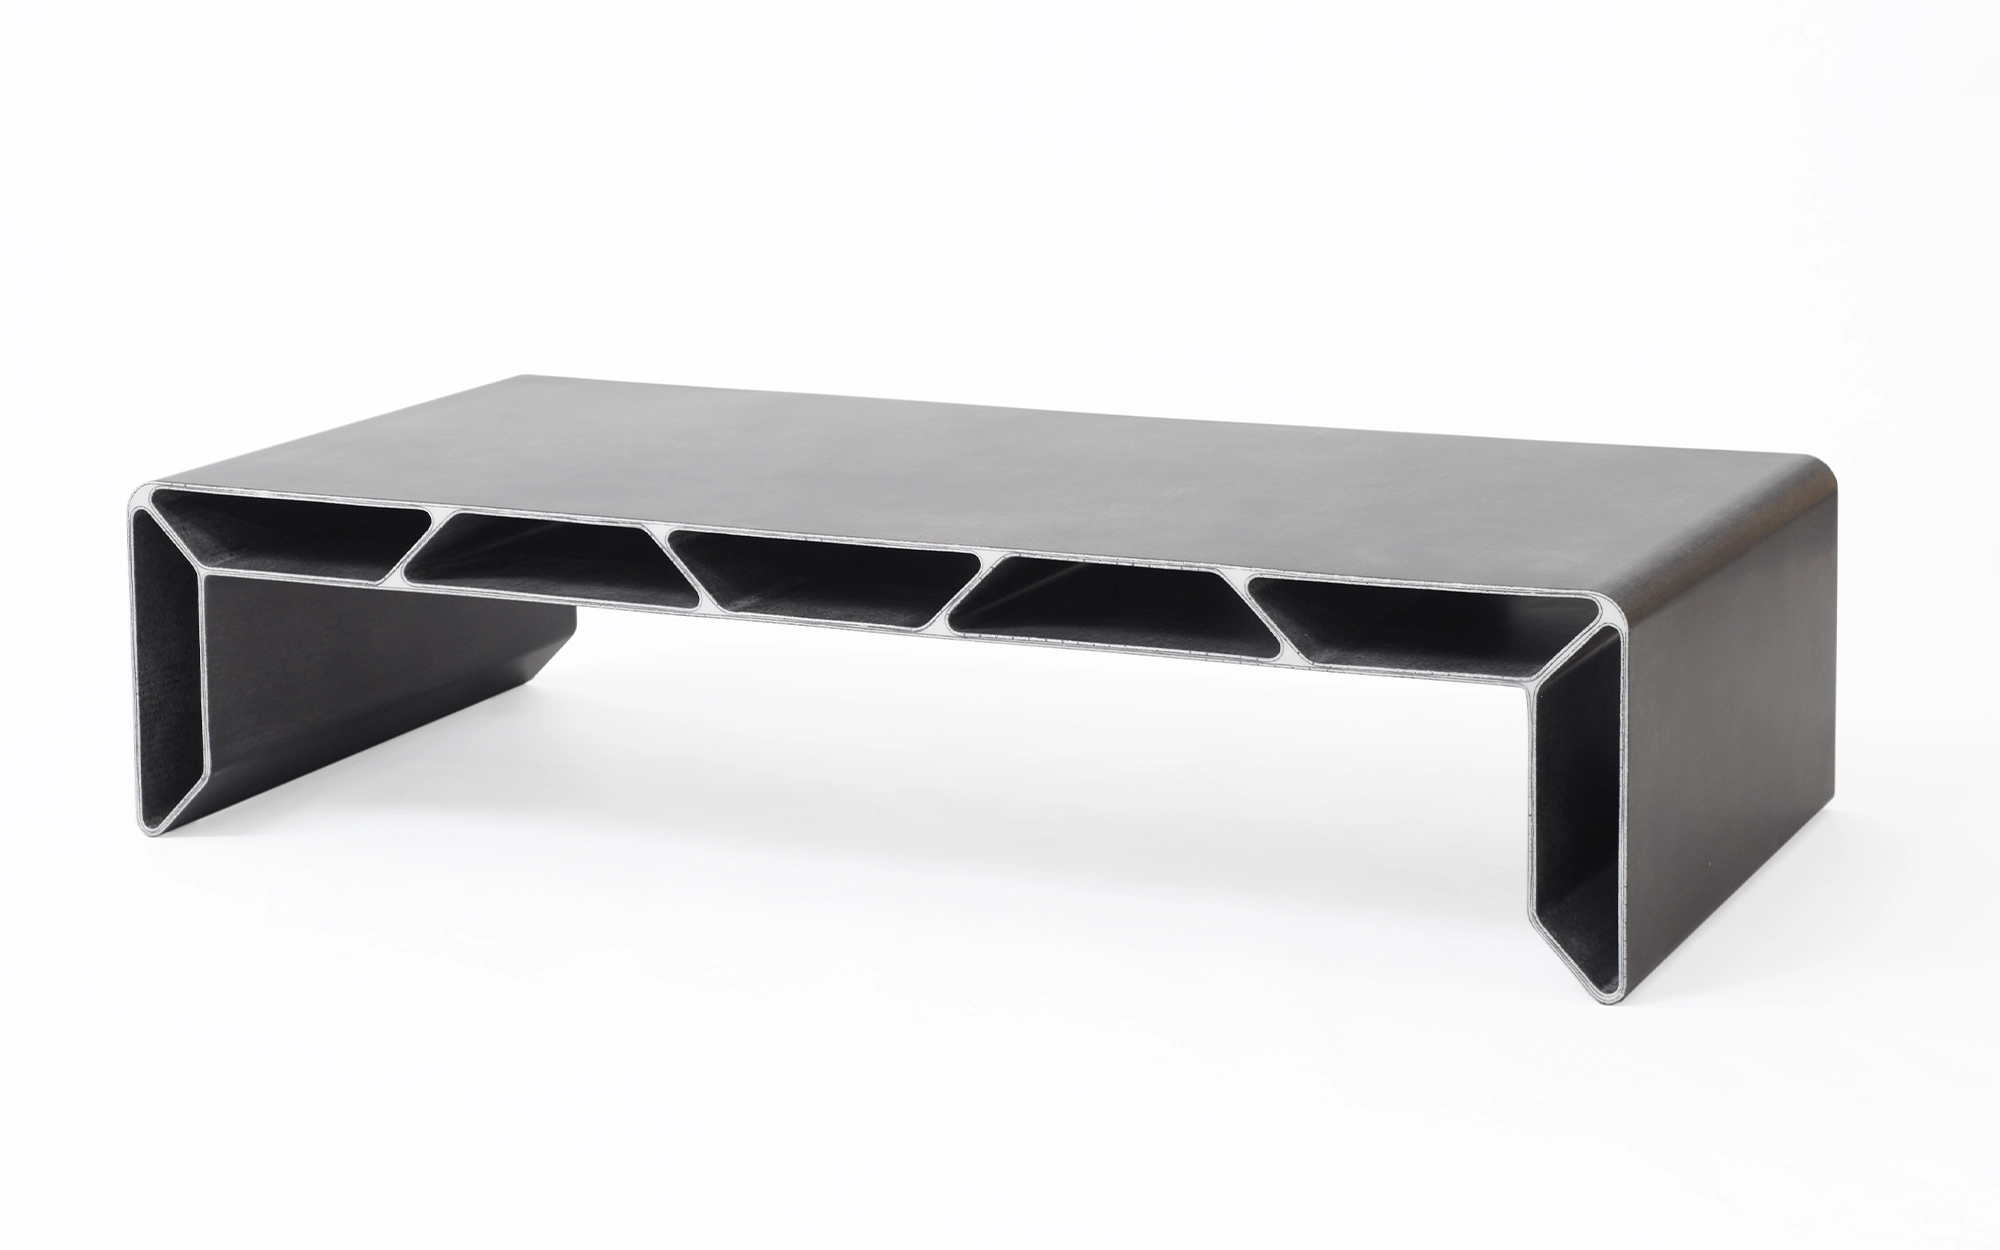 Cellae Coffee Table - François Bauchet - @home new chapter .